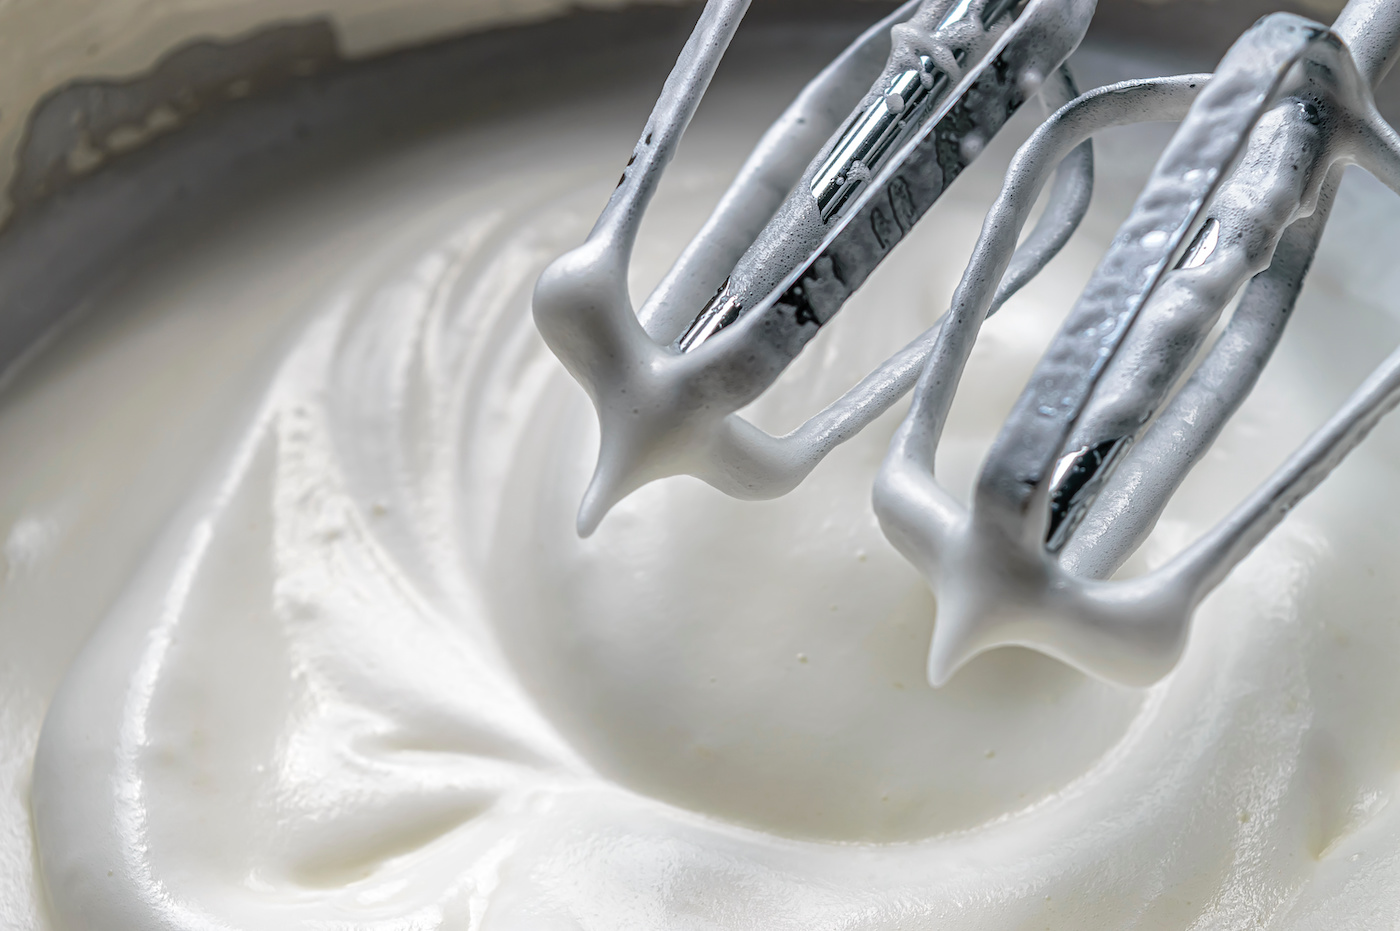 Mixing-whipping-cream-and-sugar-in-a-mixture